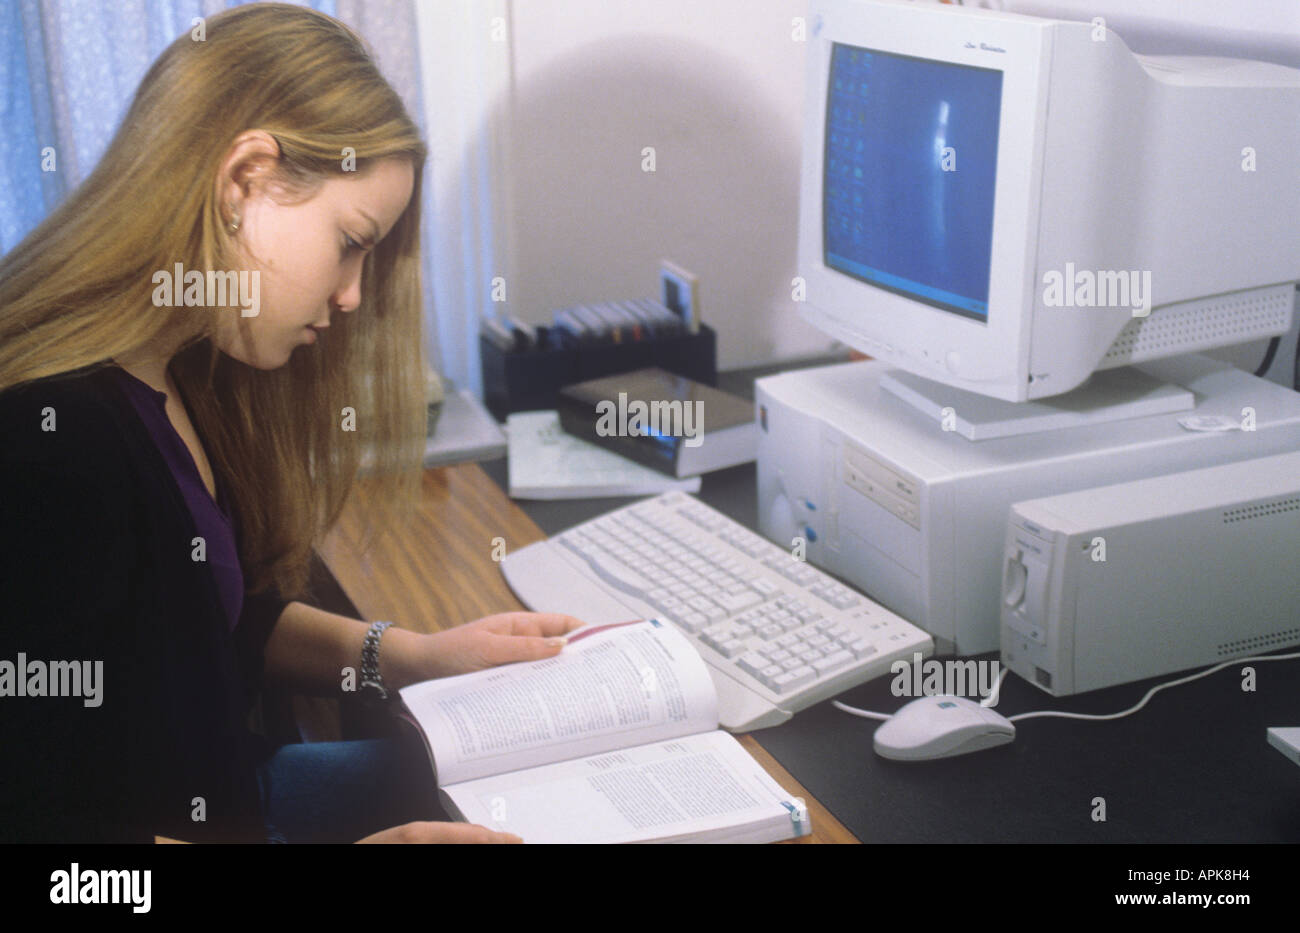 Teenage girl, sitting at desk with computer, reading Stock Photo